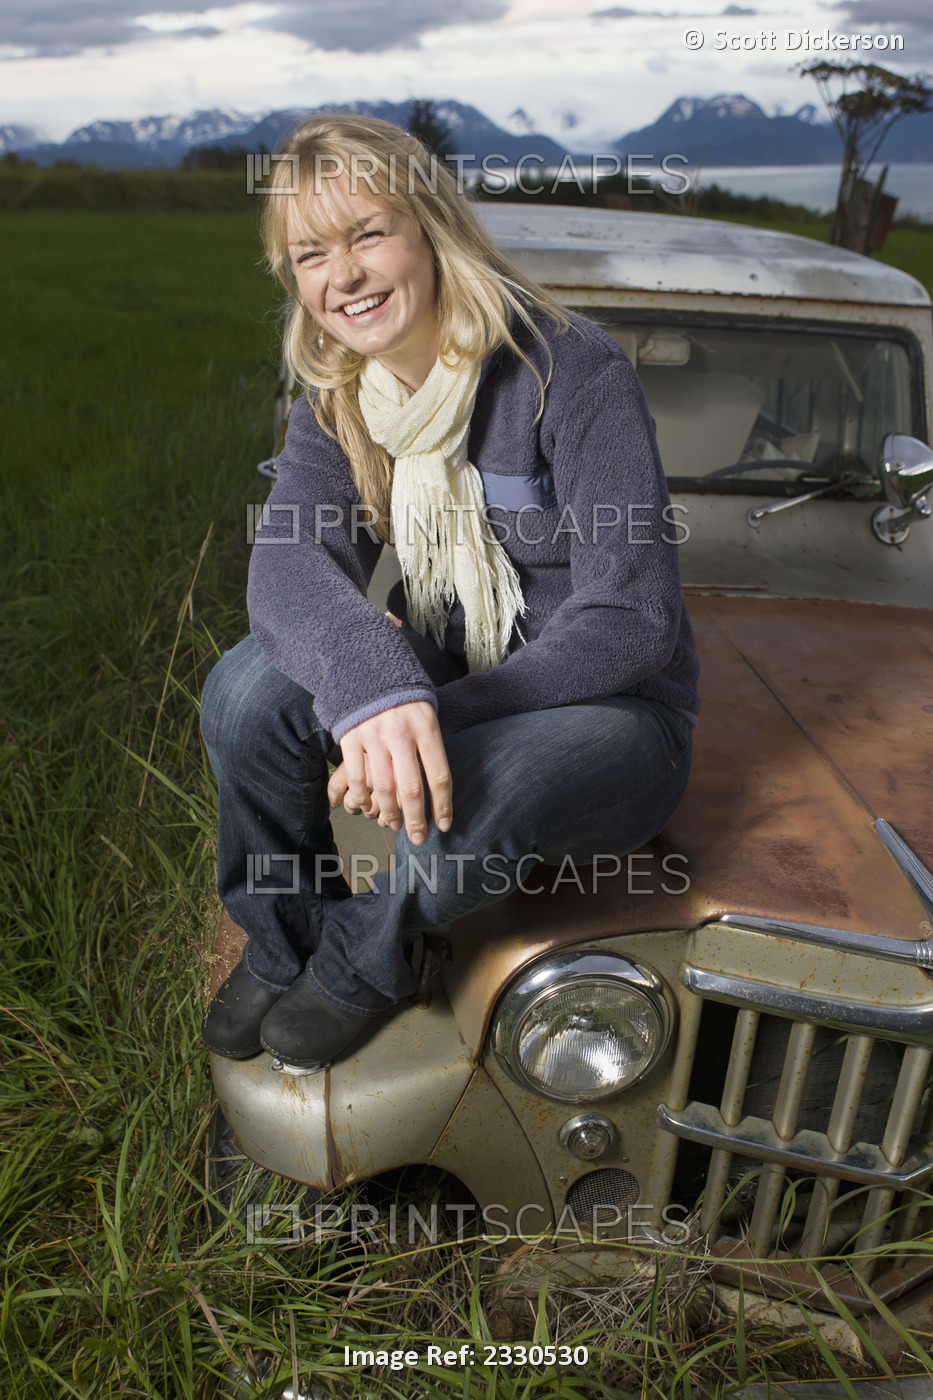 Portrait Of A Teenage Girl Sitting On A Vintage Car With Mountains In The ...